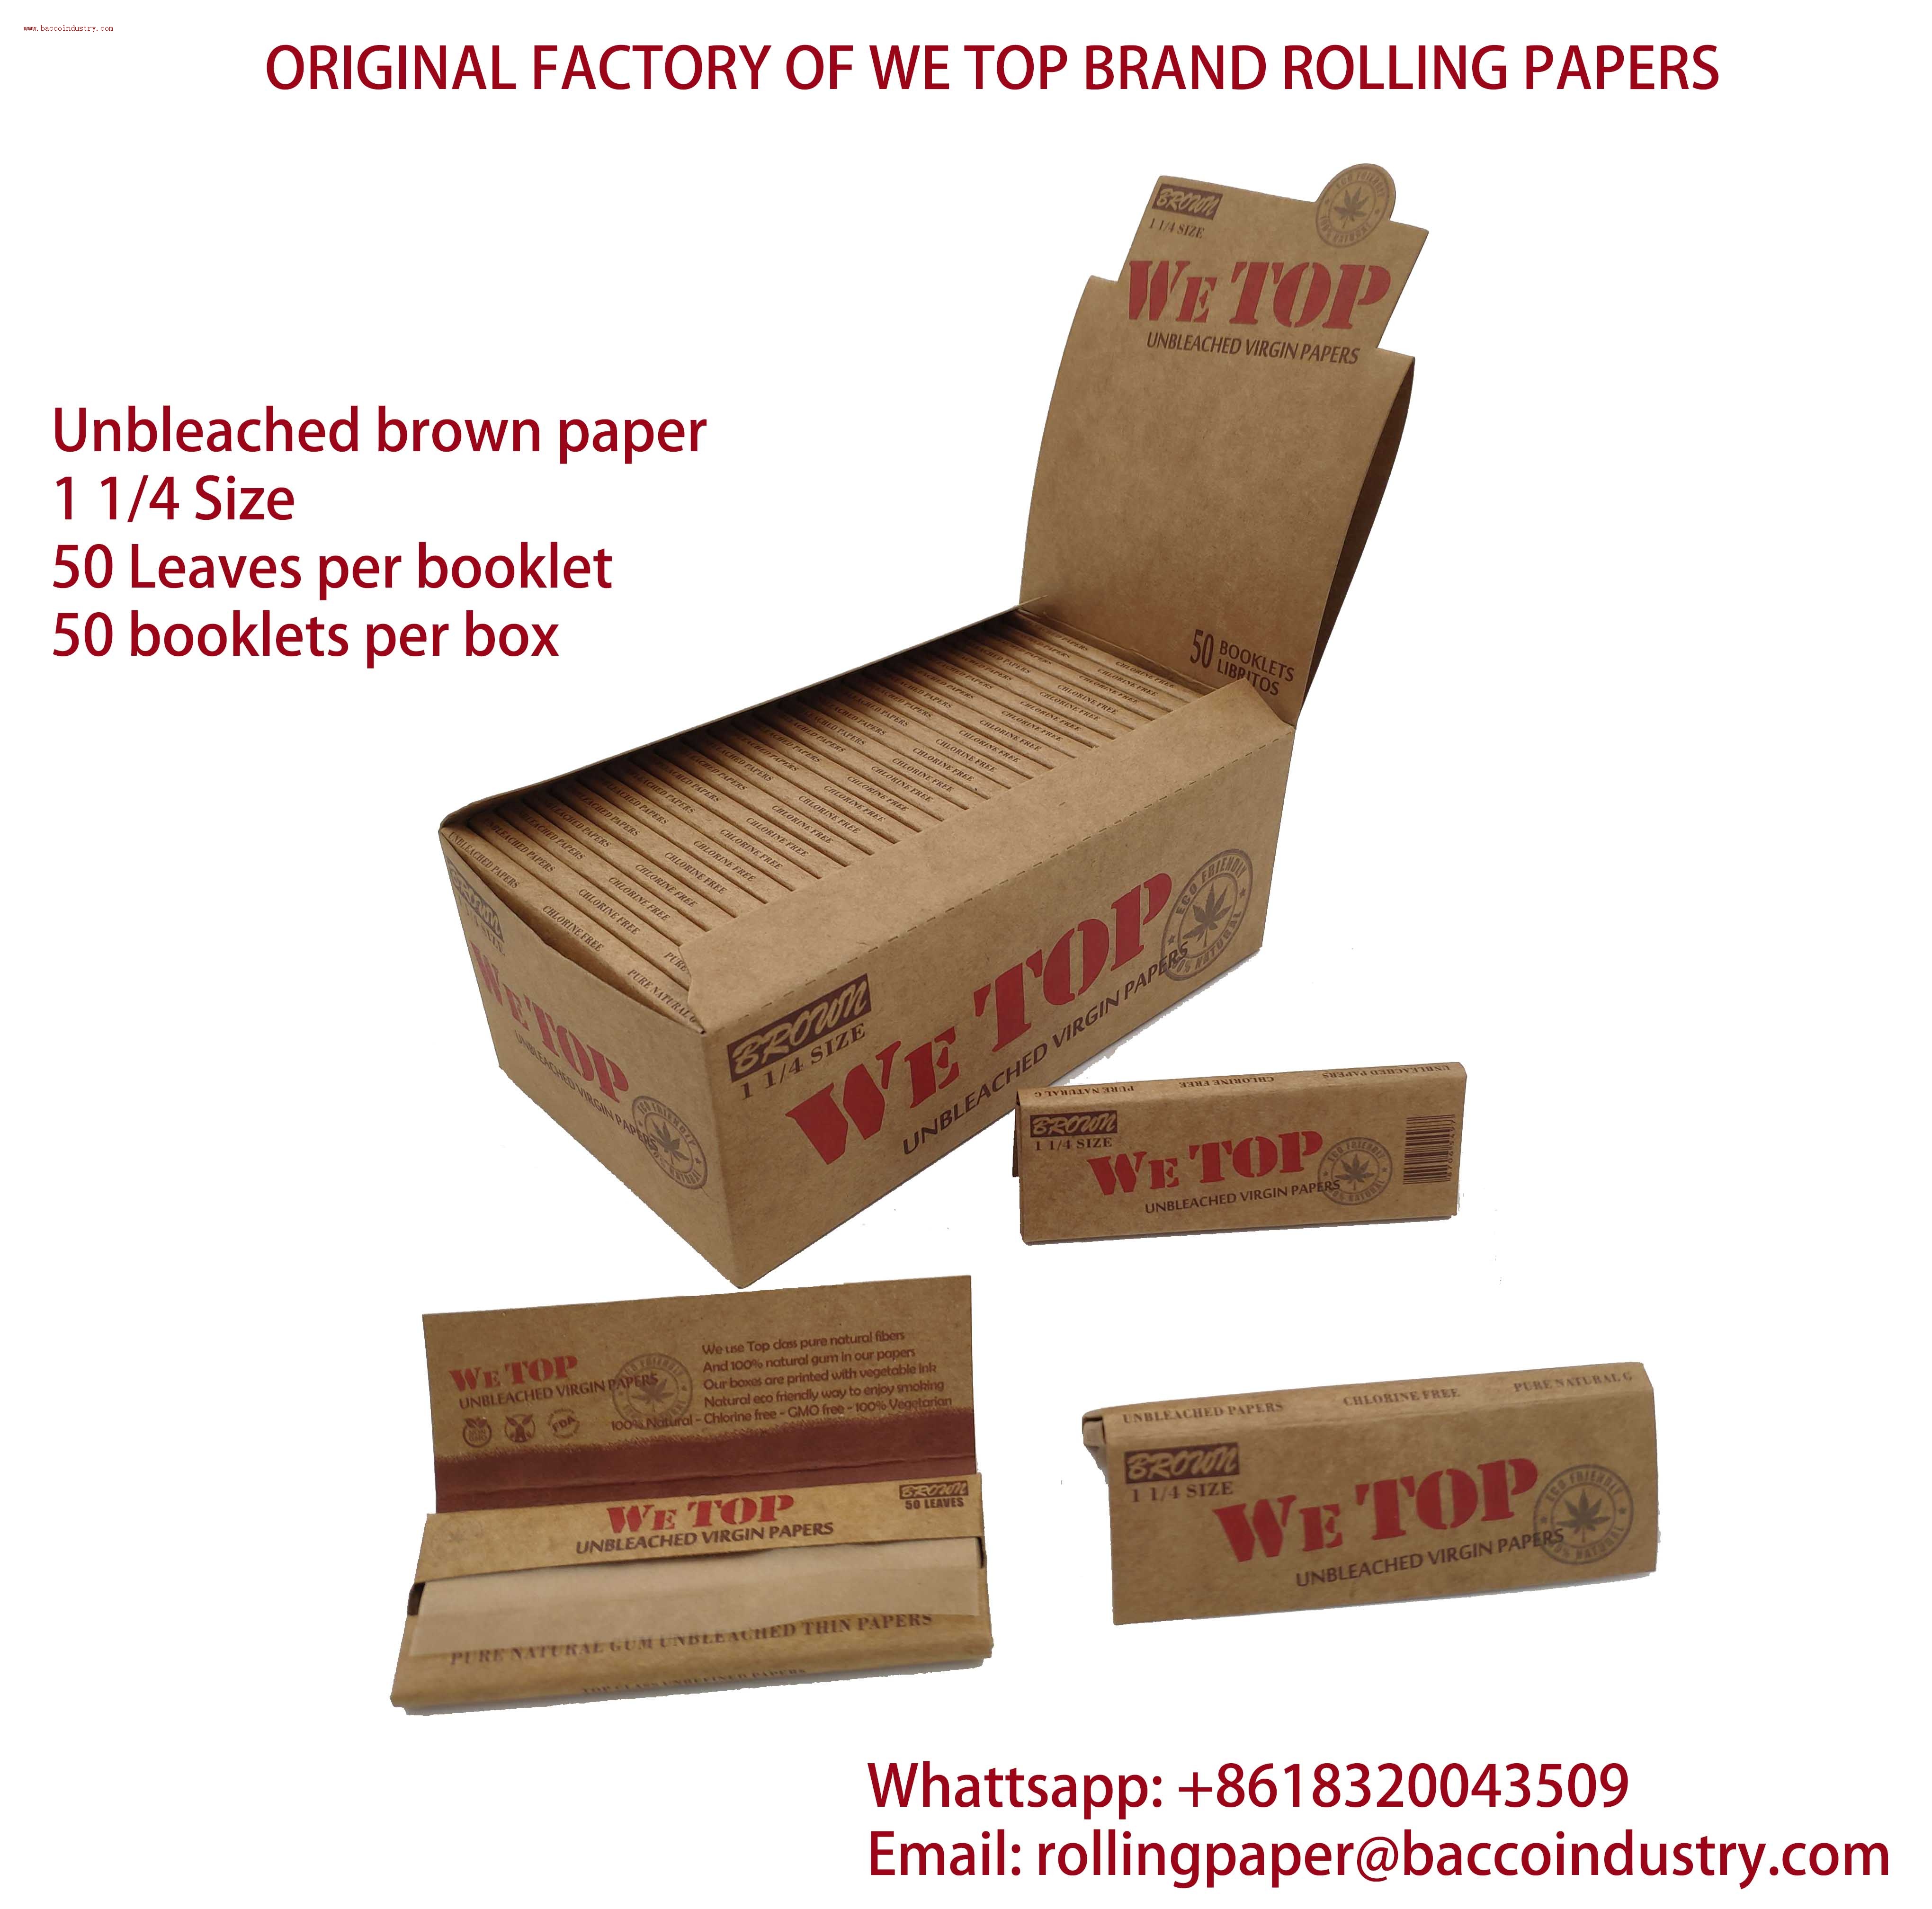 WE TOP unbleached brown rolling papers 1 1/4 size, 50 leaves per booklet, 50 booklets per box.